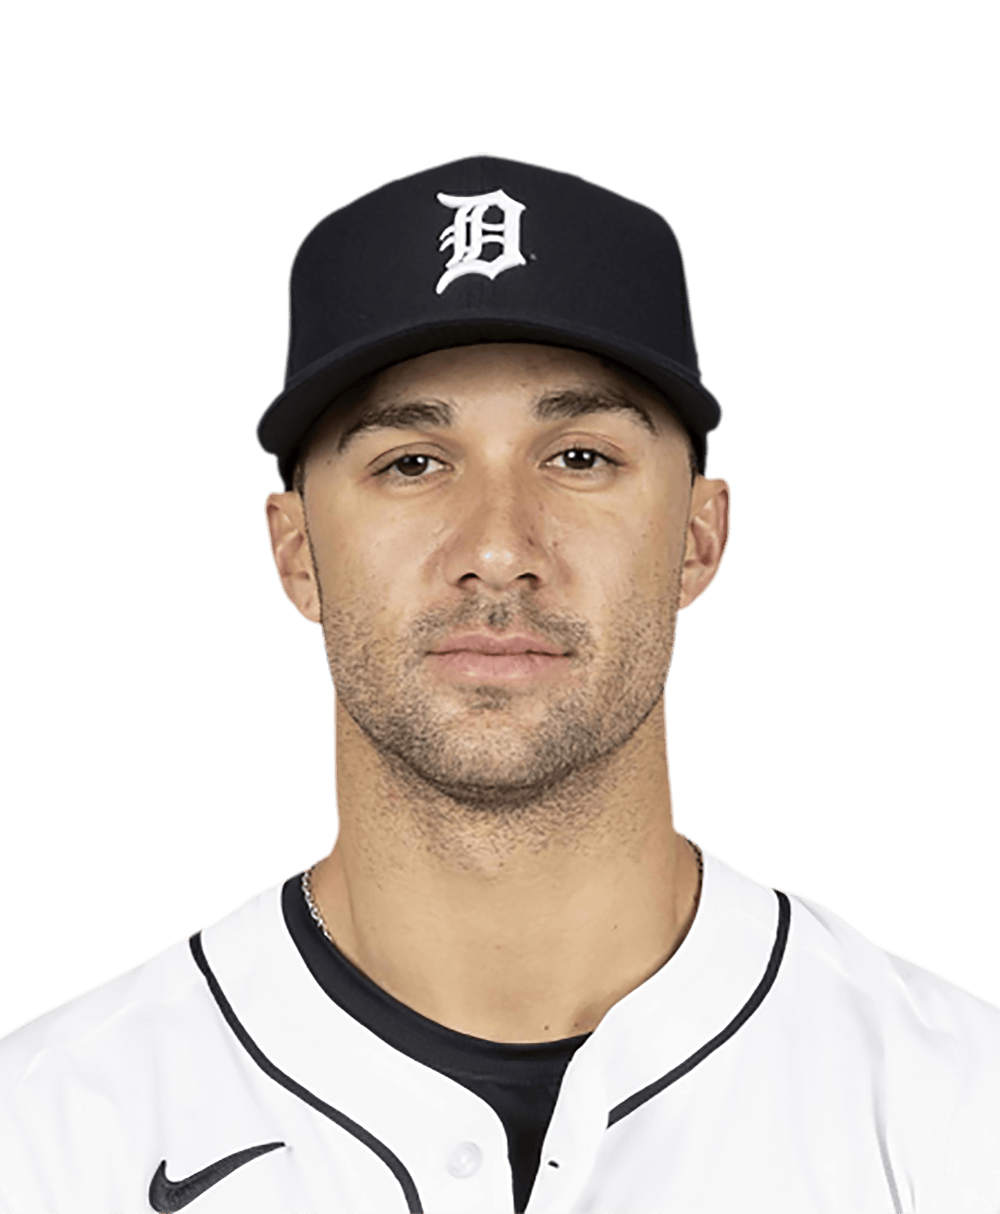 Orioles acquire pitcher Jack Flaherty from the Cardinals and hold